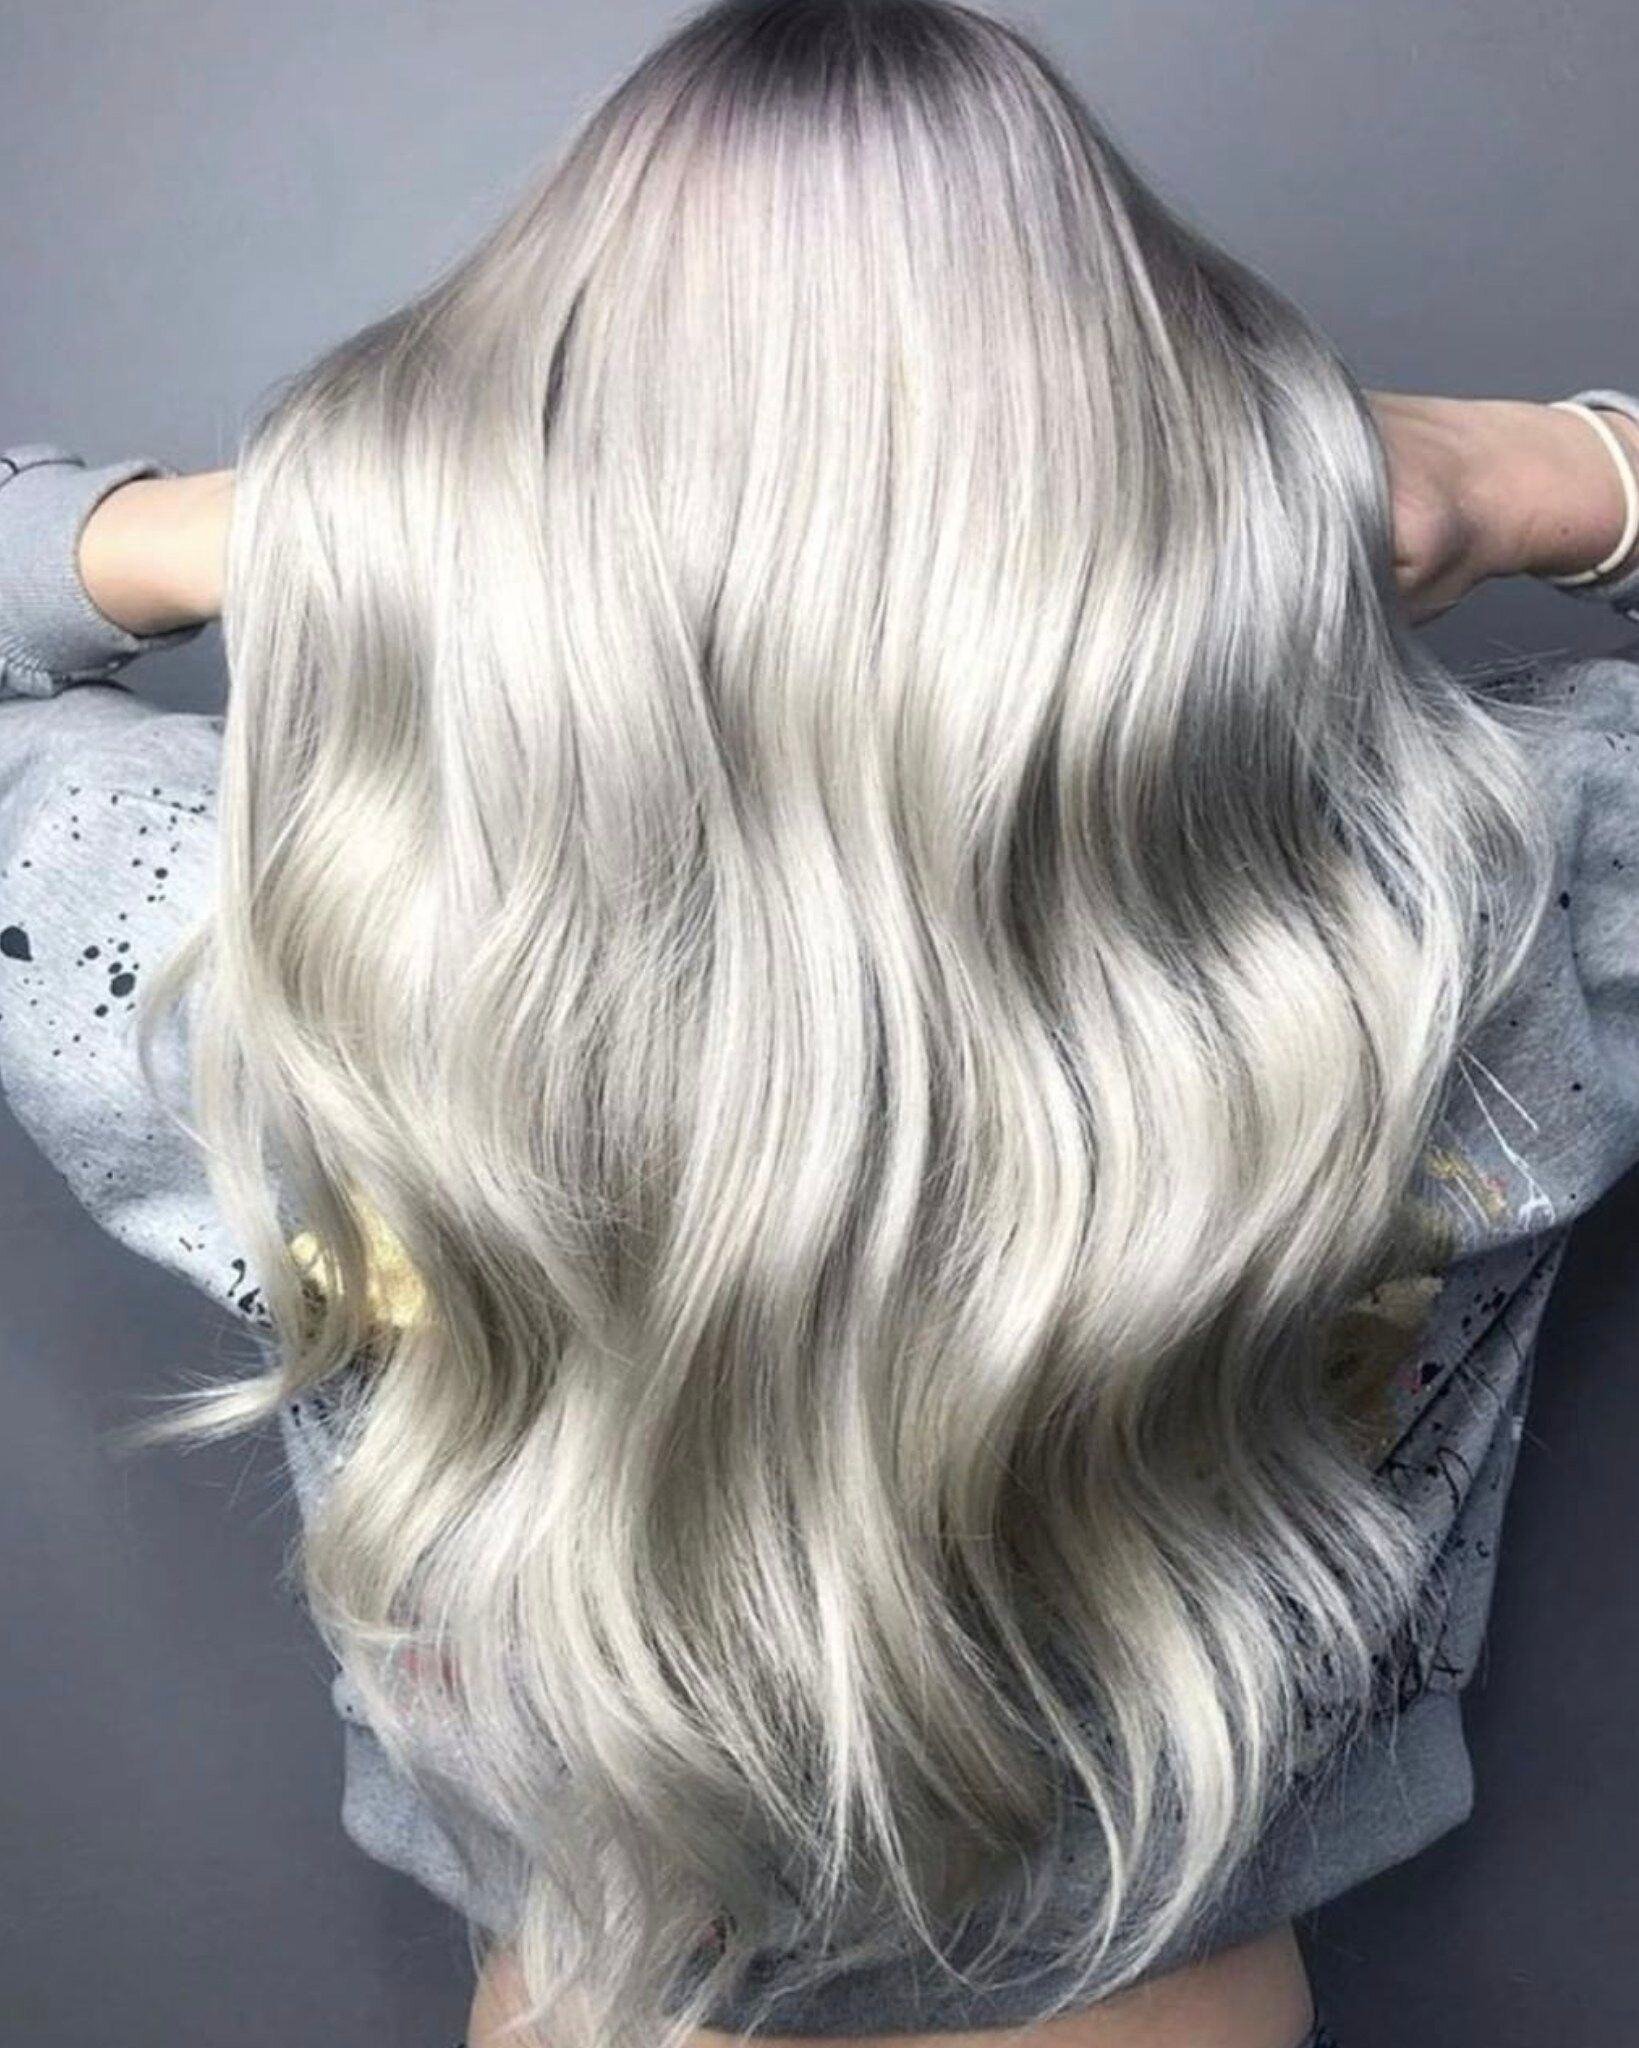 &ldquo;It doesn&rsquo;t matter if your life is perfect as long as your hair color is.&rdquo; &ndash; Stacy Snapp Killian
&mdash;
📷 : @brazilianbondbuilder
.
.
.
#hairinyourhair #hairextensions #hairporn #styles #hairstyle #beauty #weave #nyc #nychai